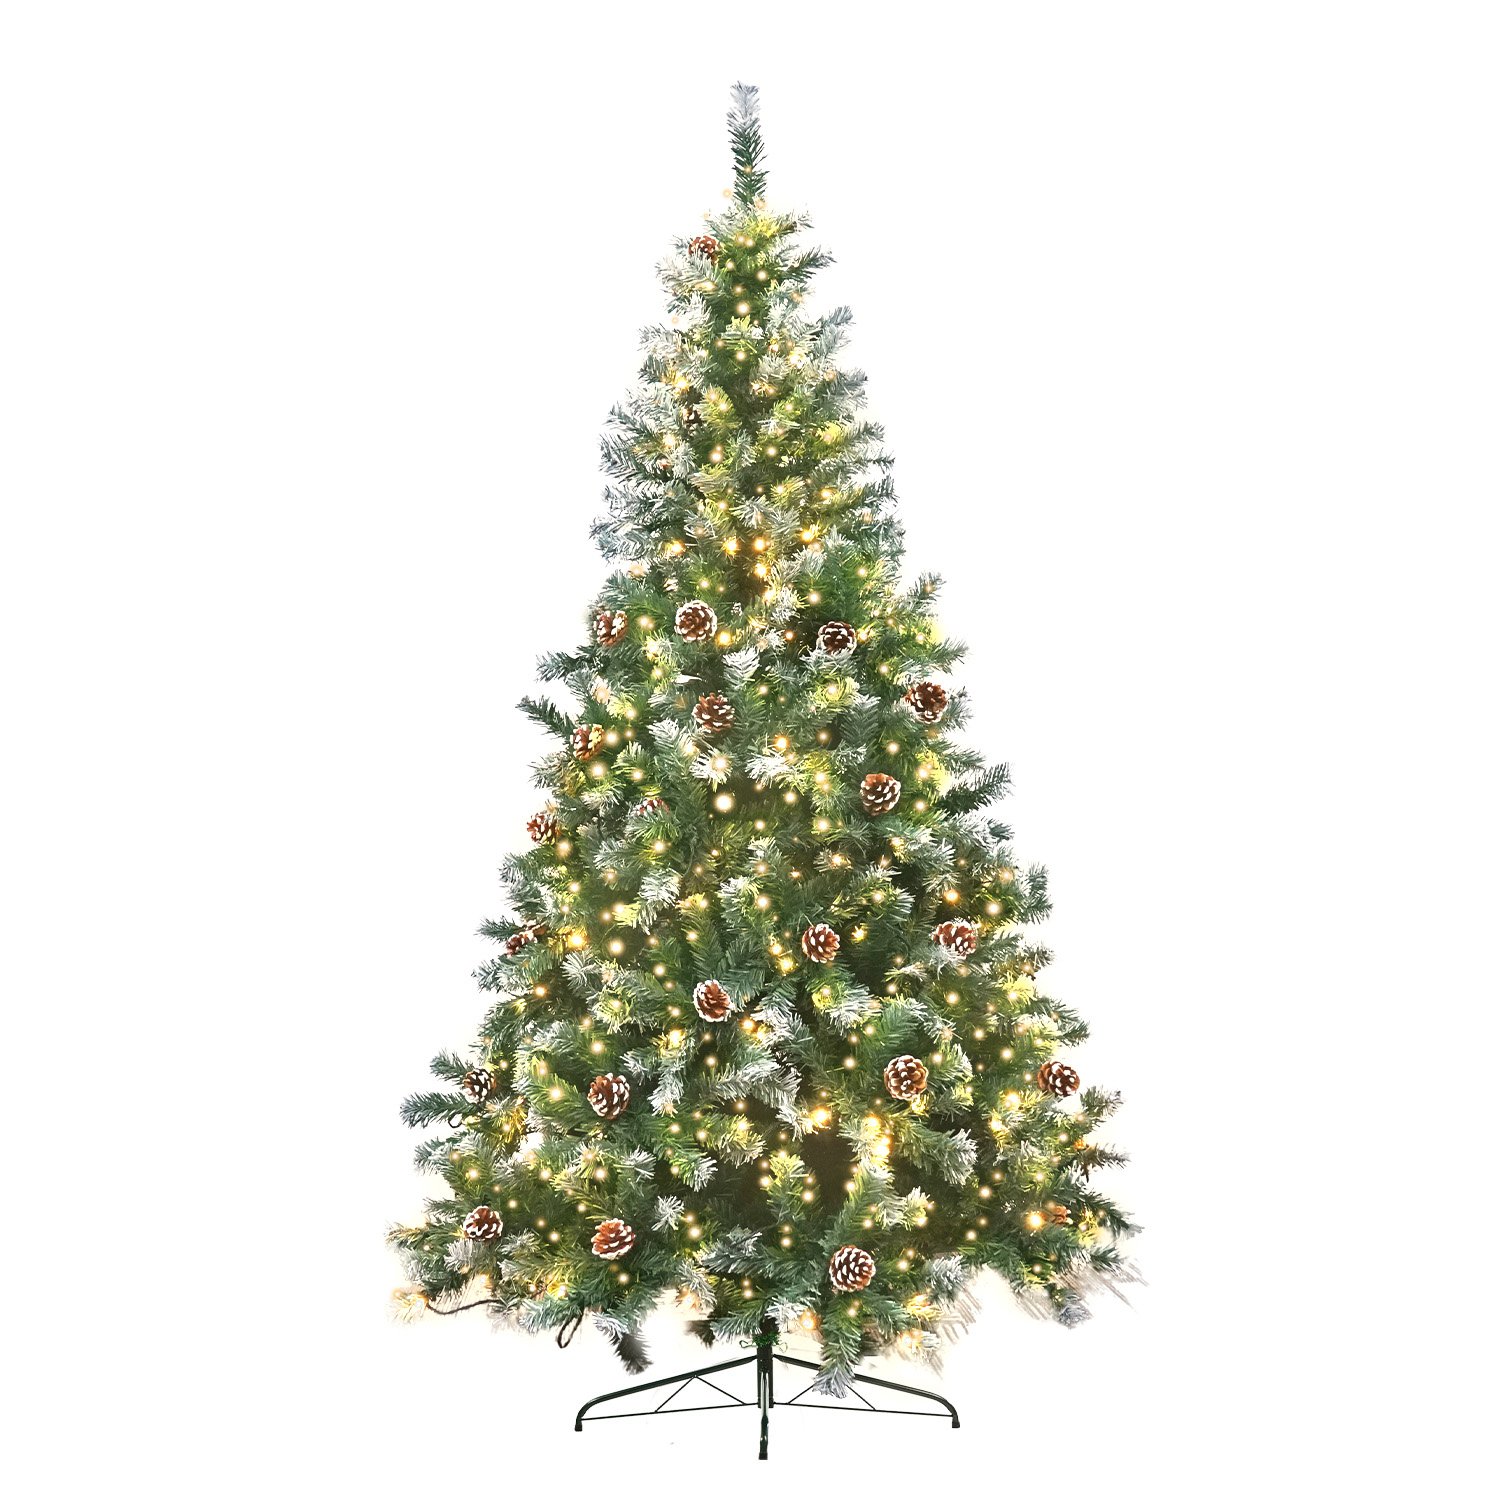 Christabelle 1.8m Pre Lit LED Christmas Tree with Pine Cones 2